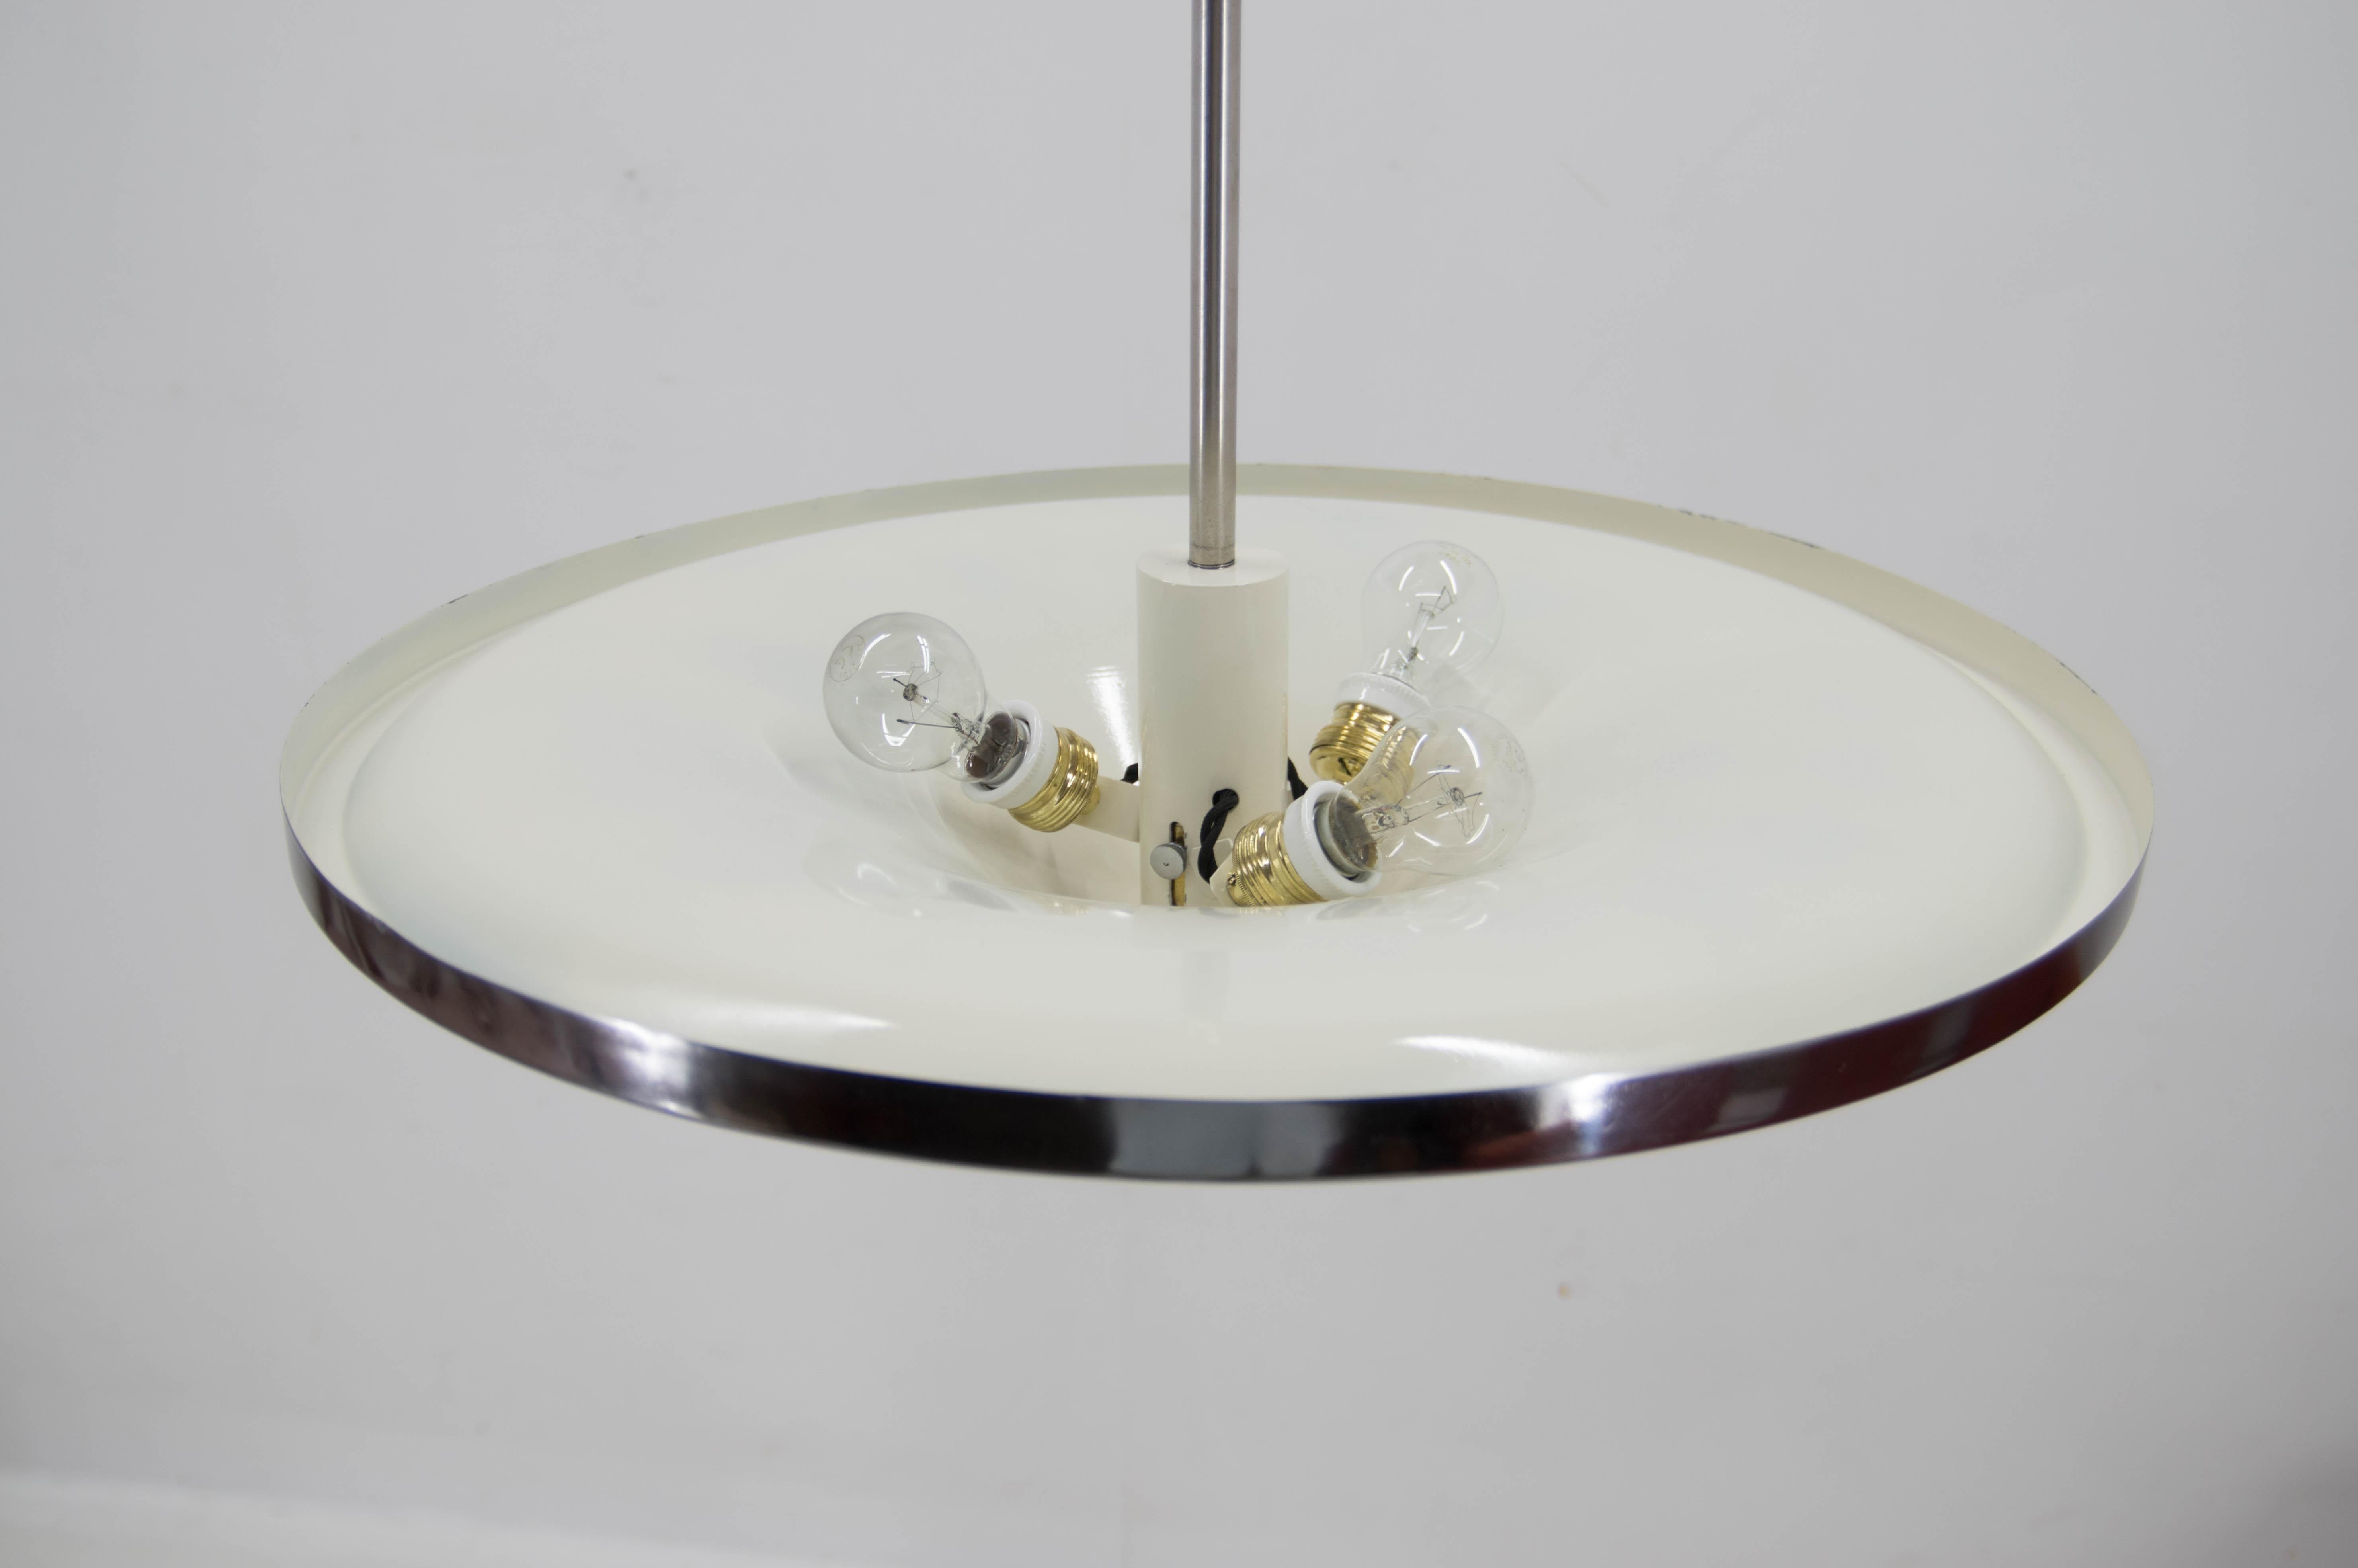 Early 20th Century Rare Bauhaus Chandelier with Indirect Light by IAS, 1920s For Sale